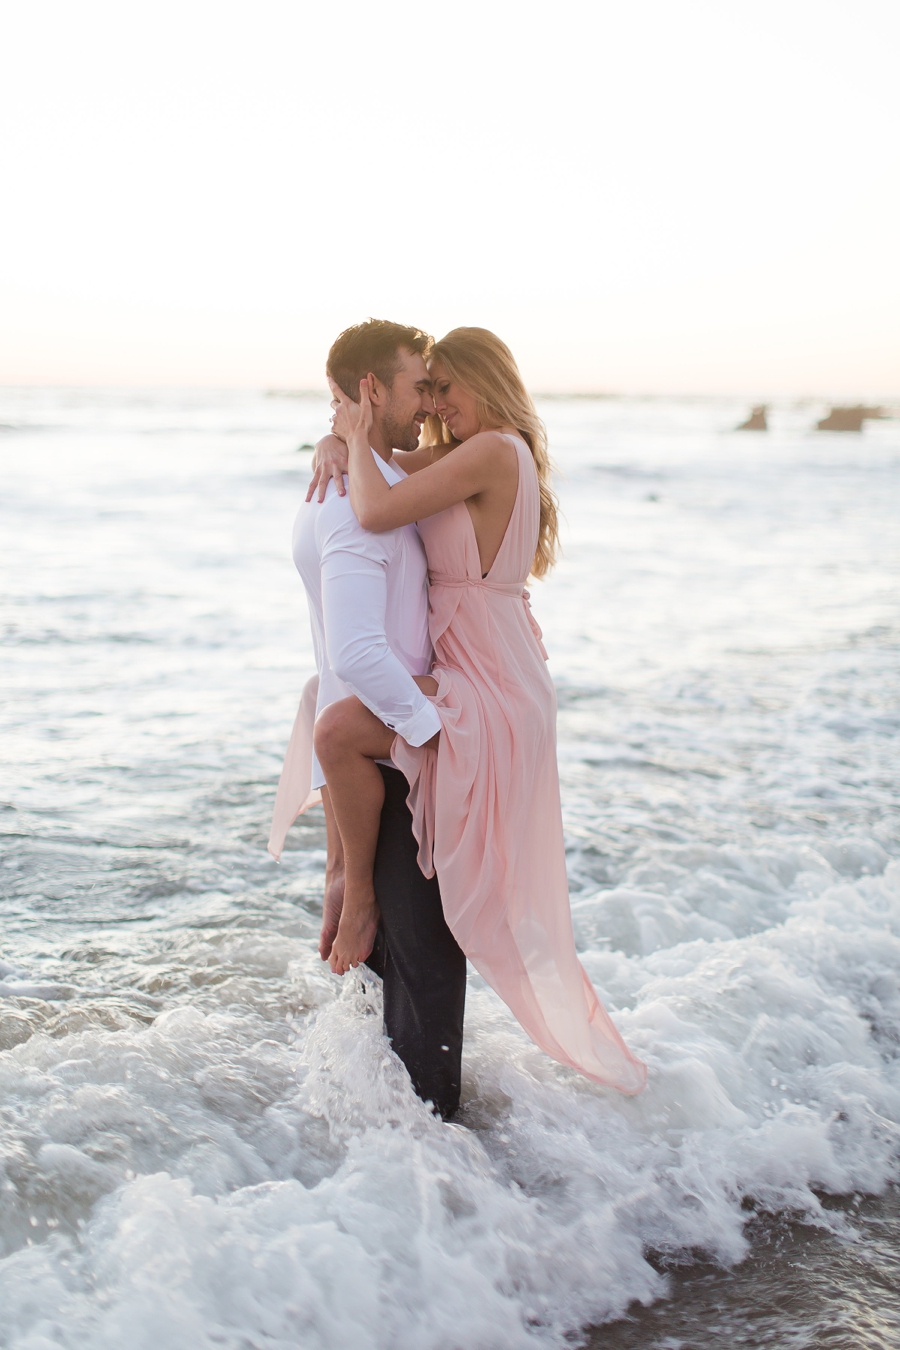 taylor_kinzie_photography_los_angeles_wedding_photographer_beach_engagement_session_0032